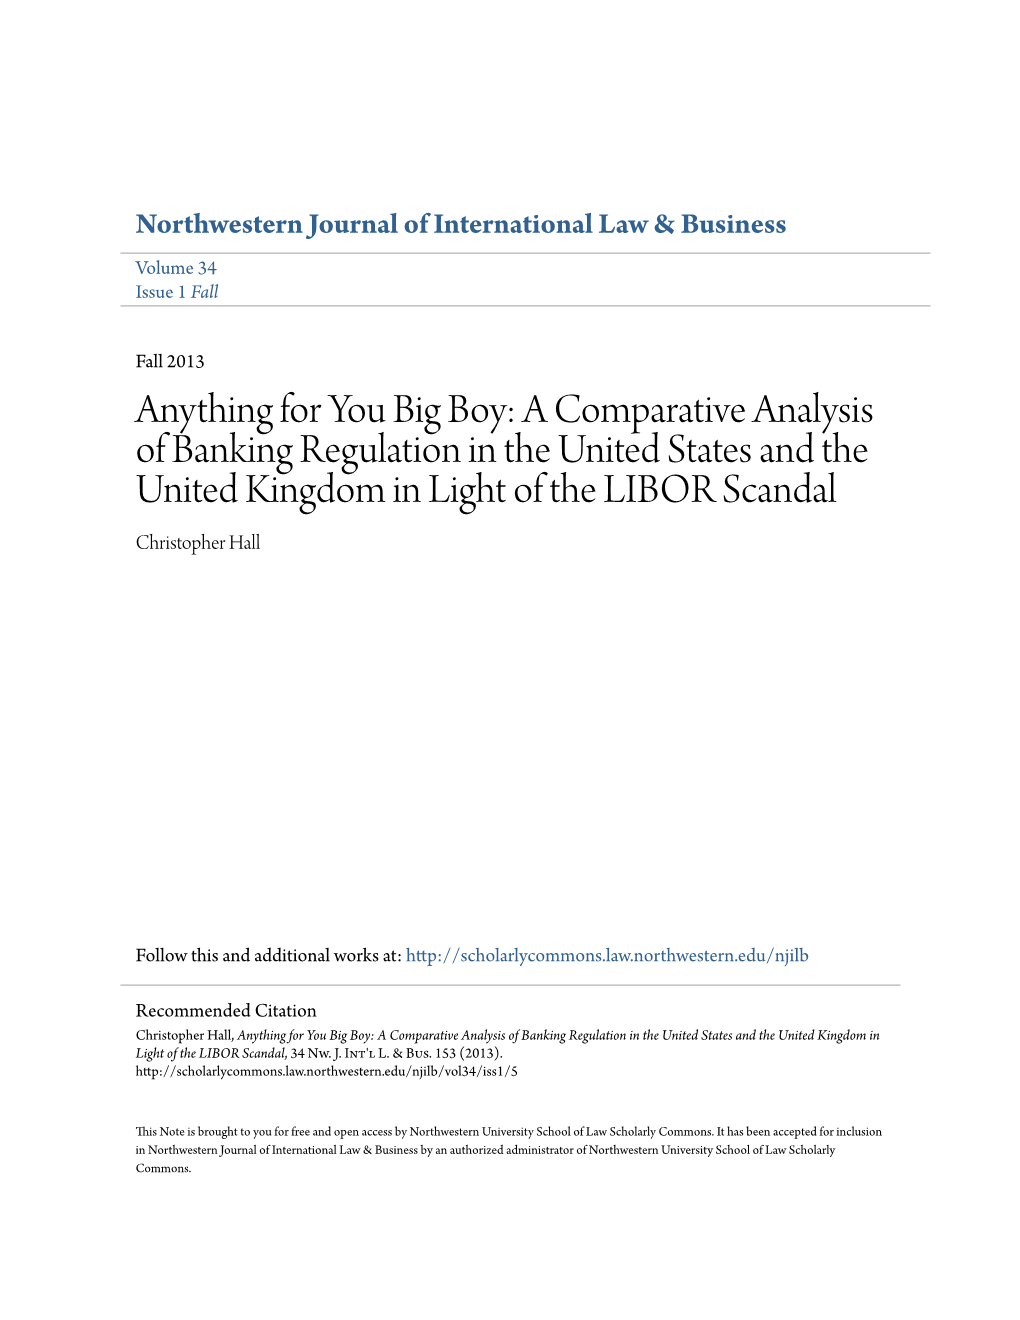 Anything for You Big Boy: a Comparative Analysis of Banking Regulation in the United States and the United Kingdom in Light of the LIBOR Scandal Christopher Hall